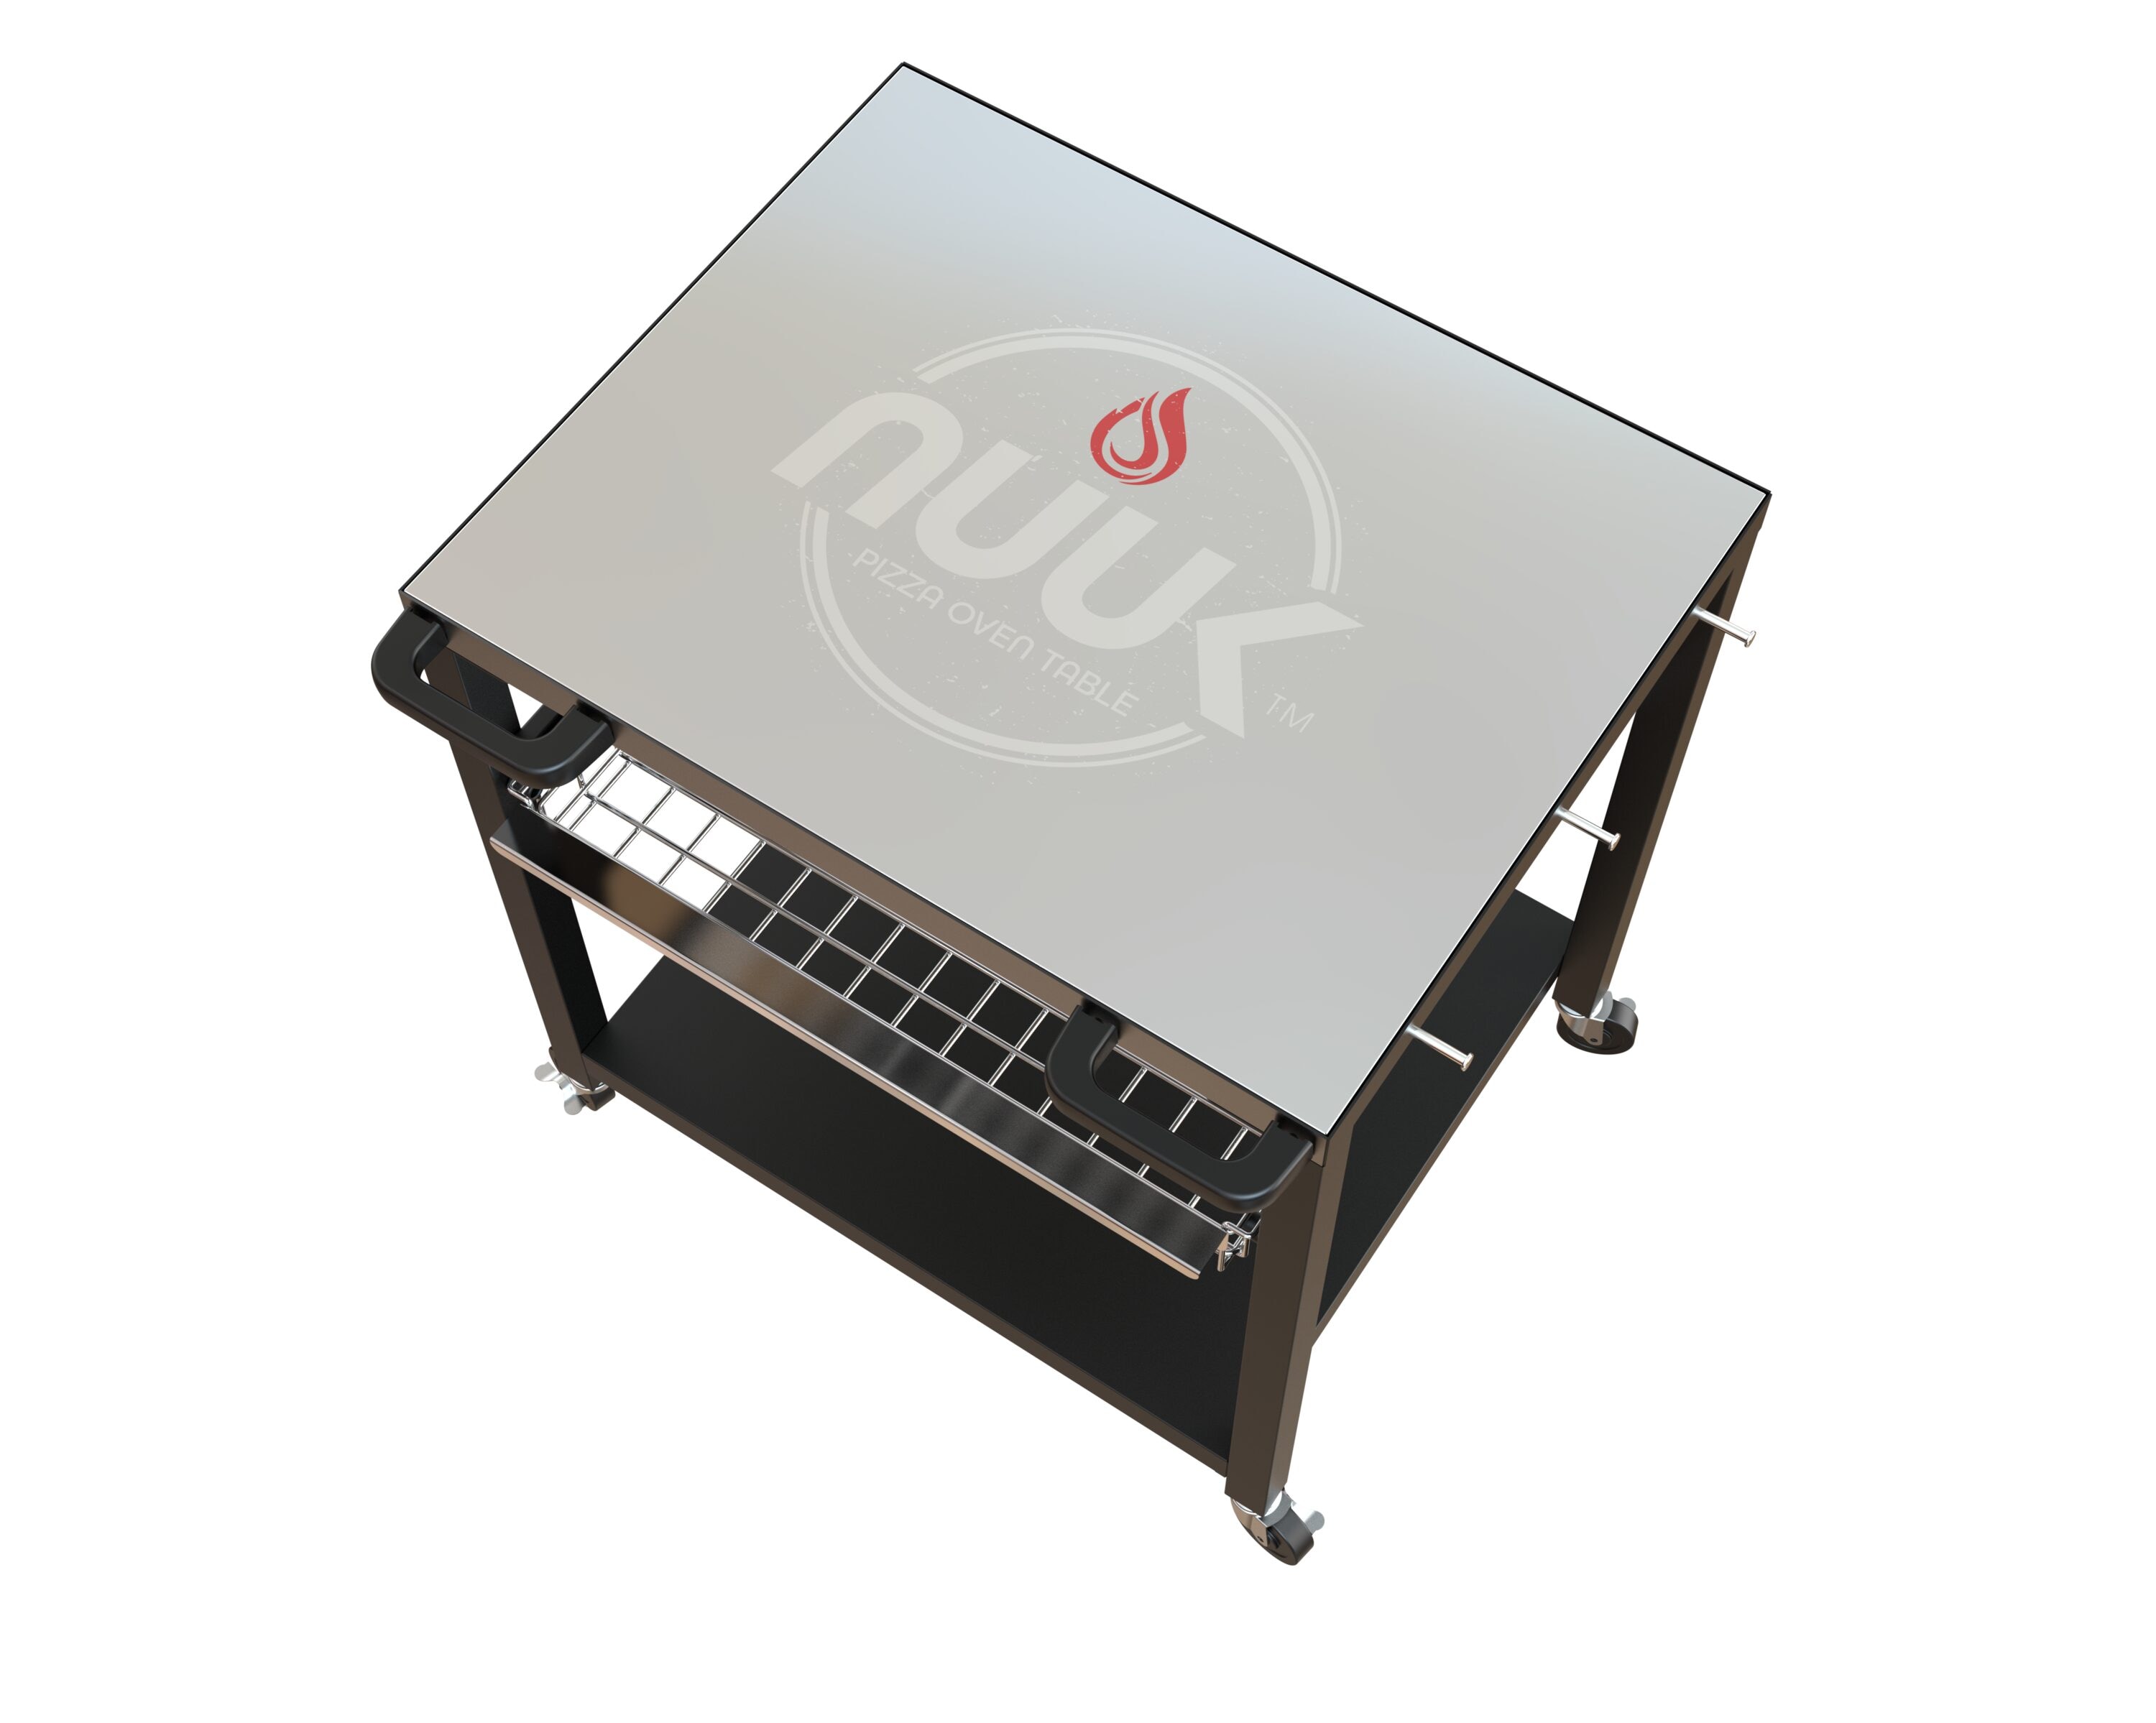 NUUK USA the Grill Tables at department Stands Carts Cart & NUUK Grill Grill in Steel Grilling